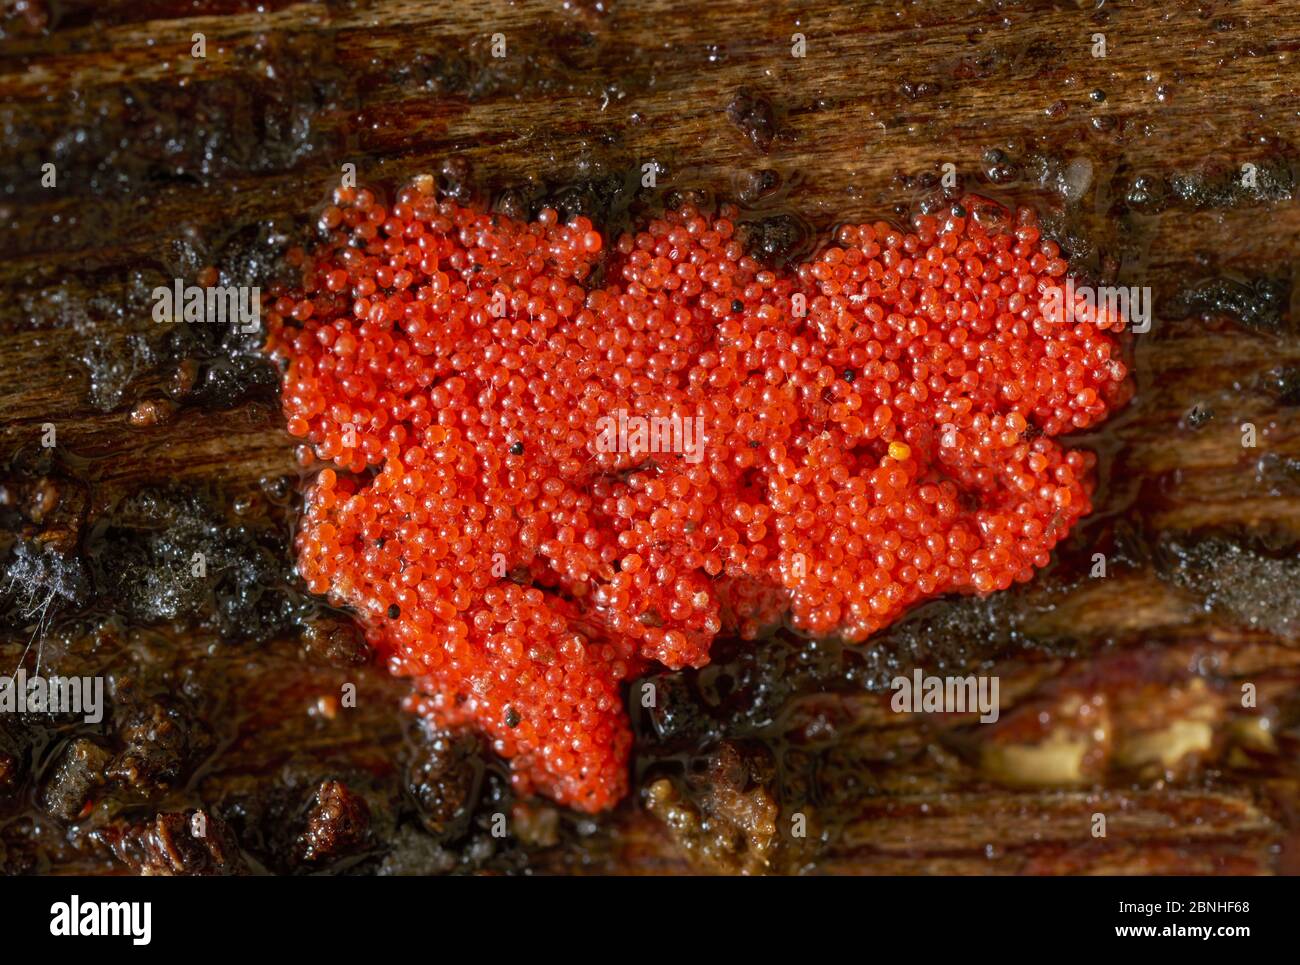 Slime mould (Arcyria sp) found on dead wood, Sussex, UK Stock Photo